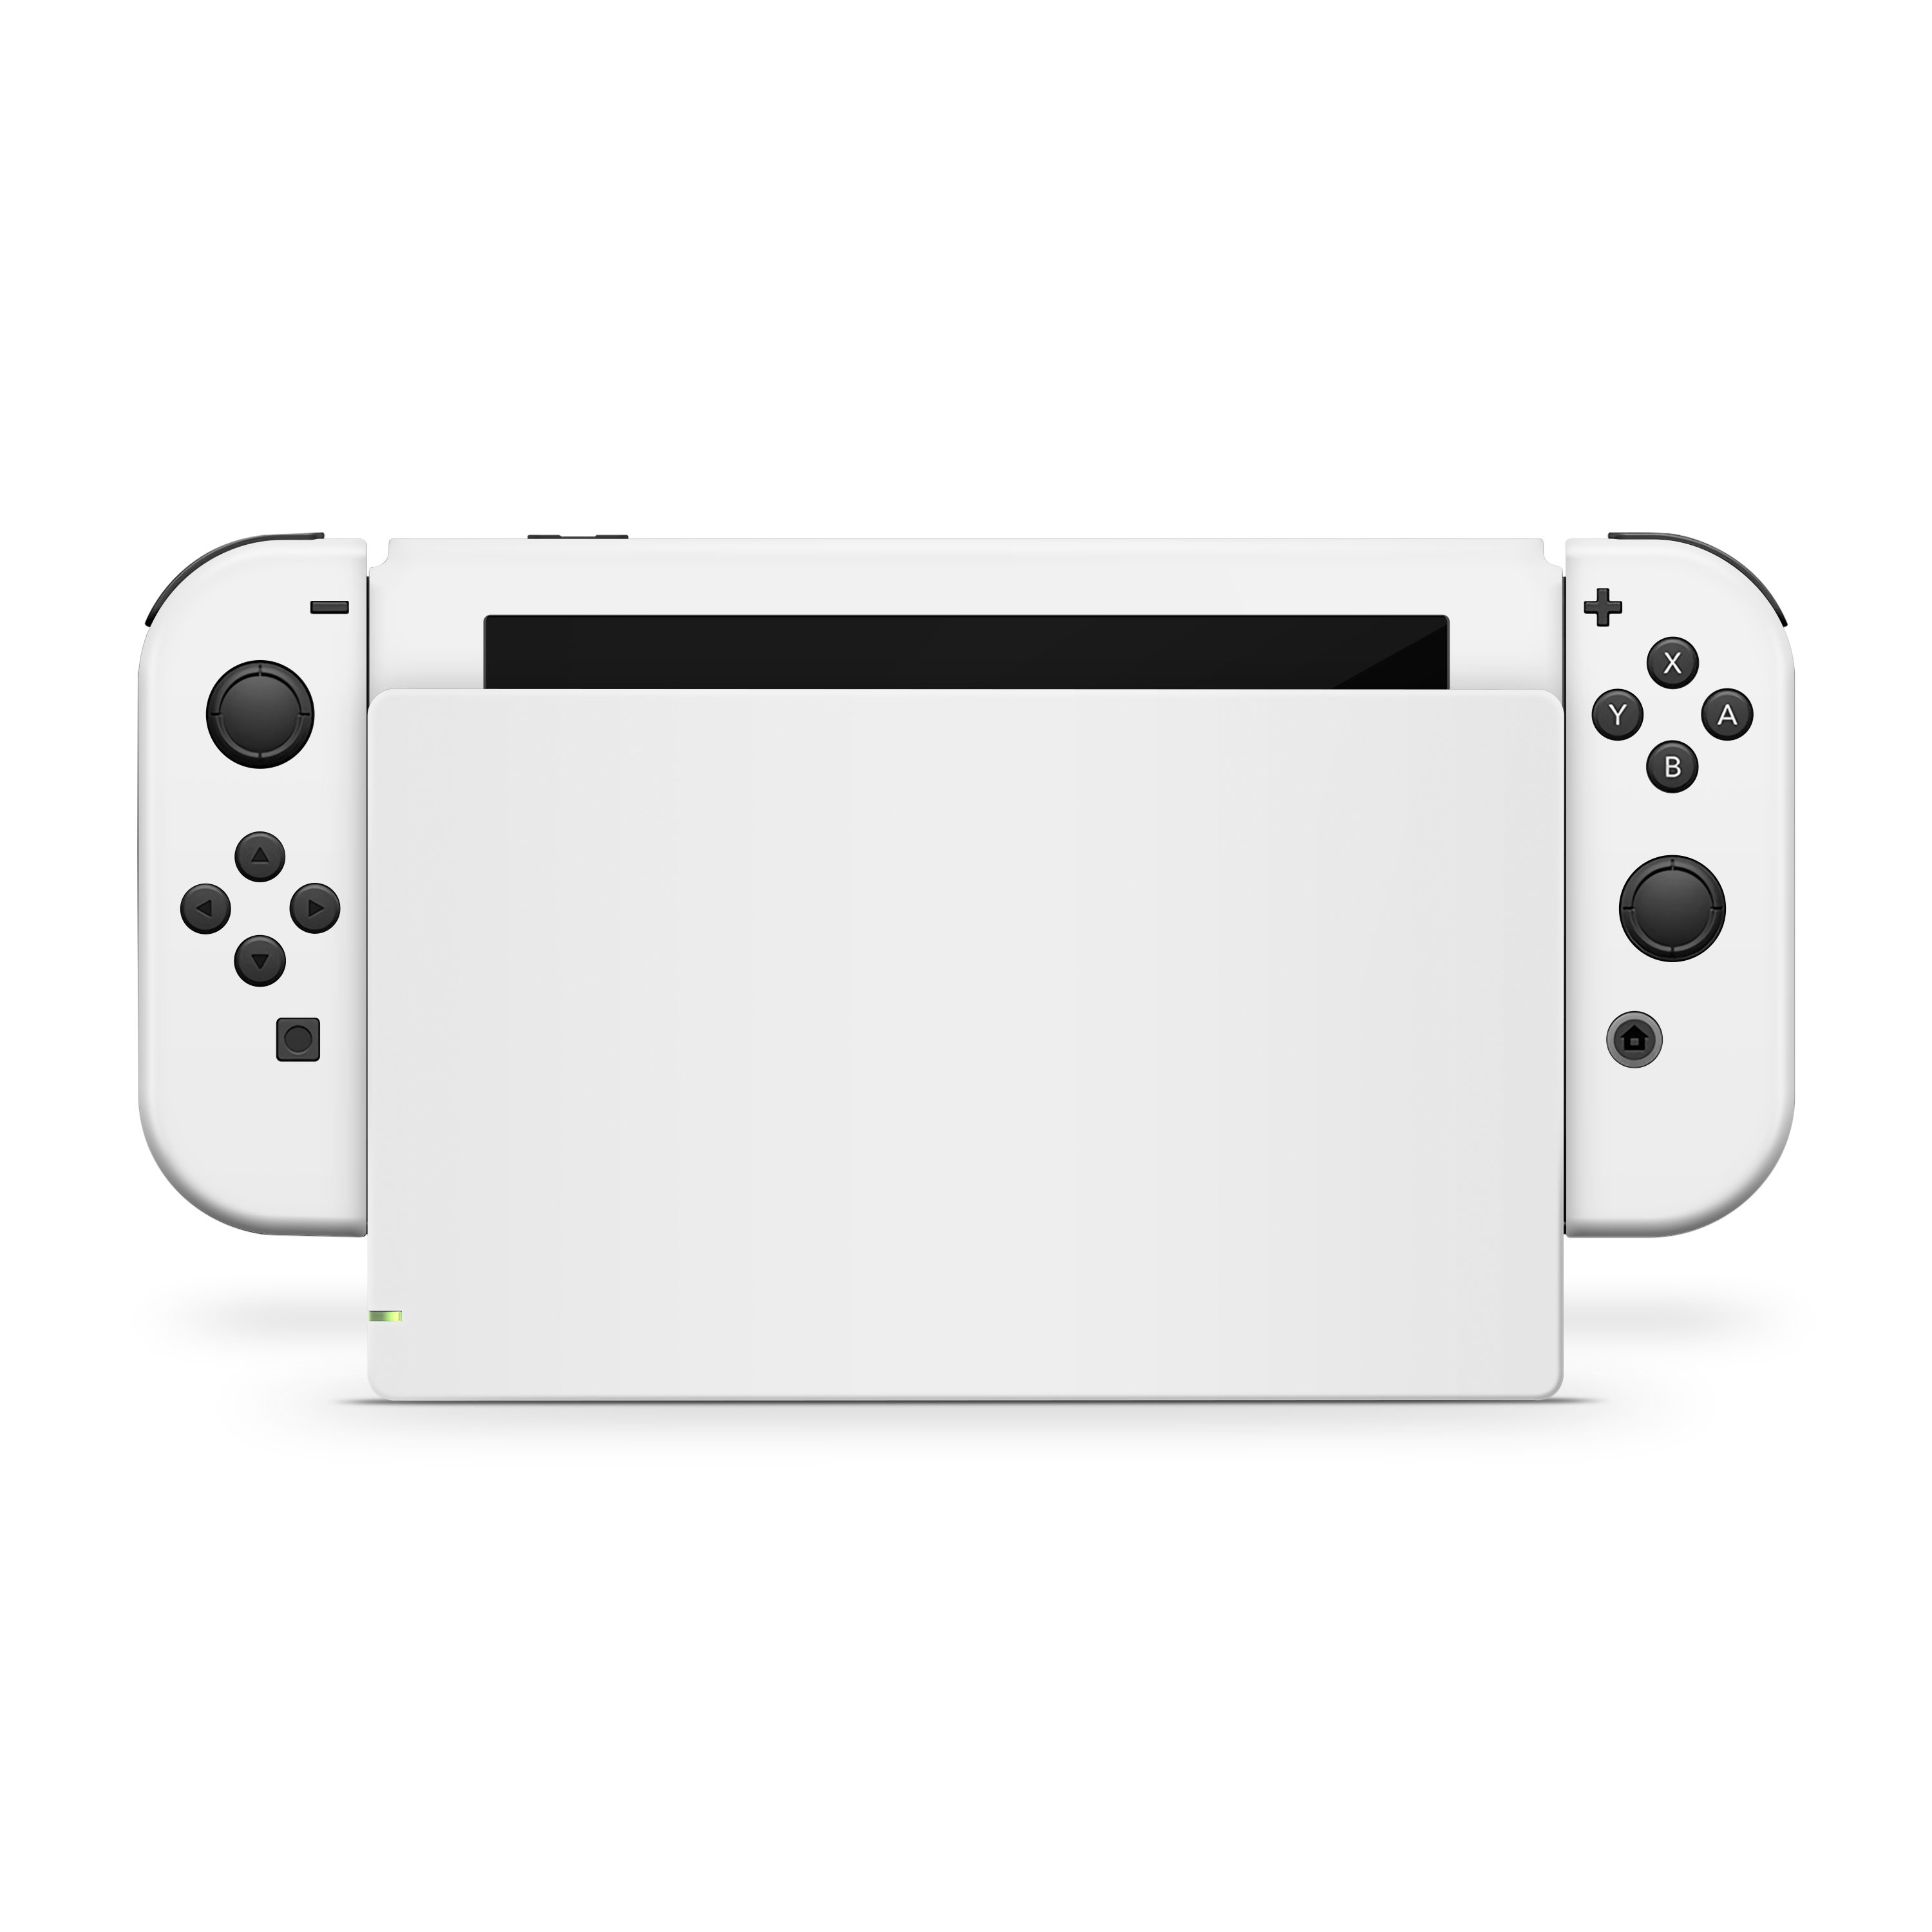 Nintendo Switch Skin // Solid White Decal for Joy-con Gaming Controller  Console & Dock // OLED Standard 